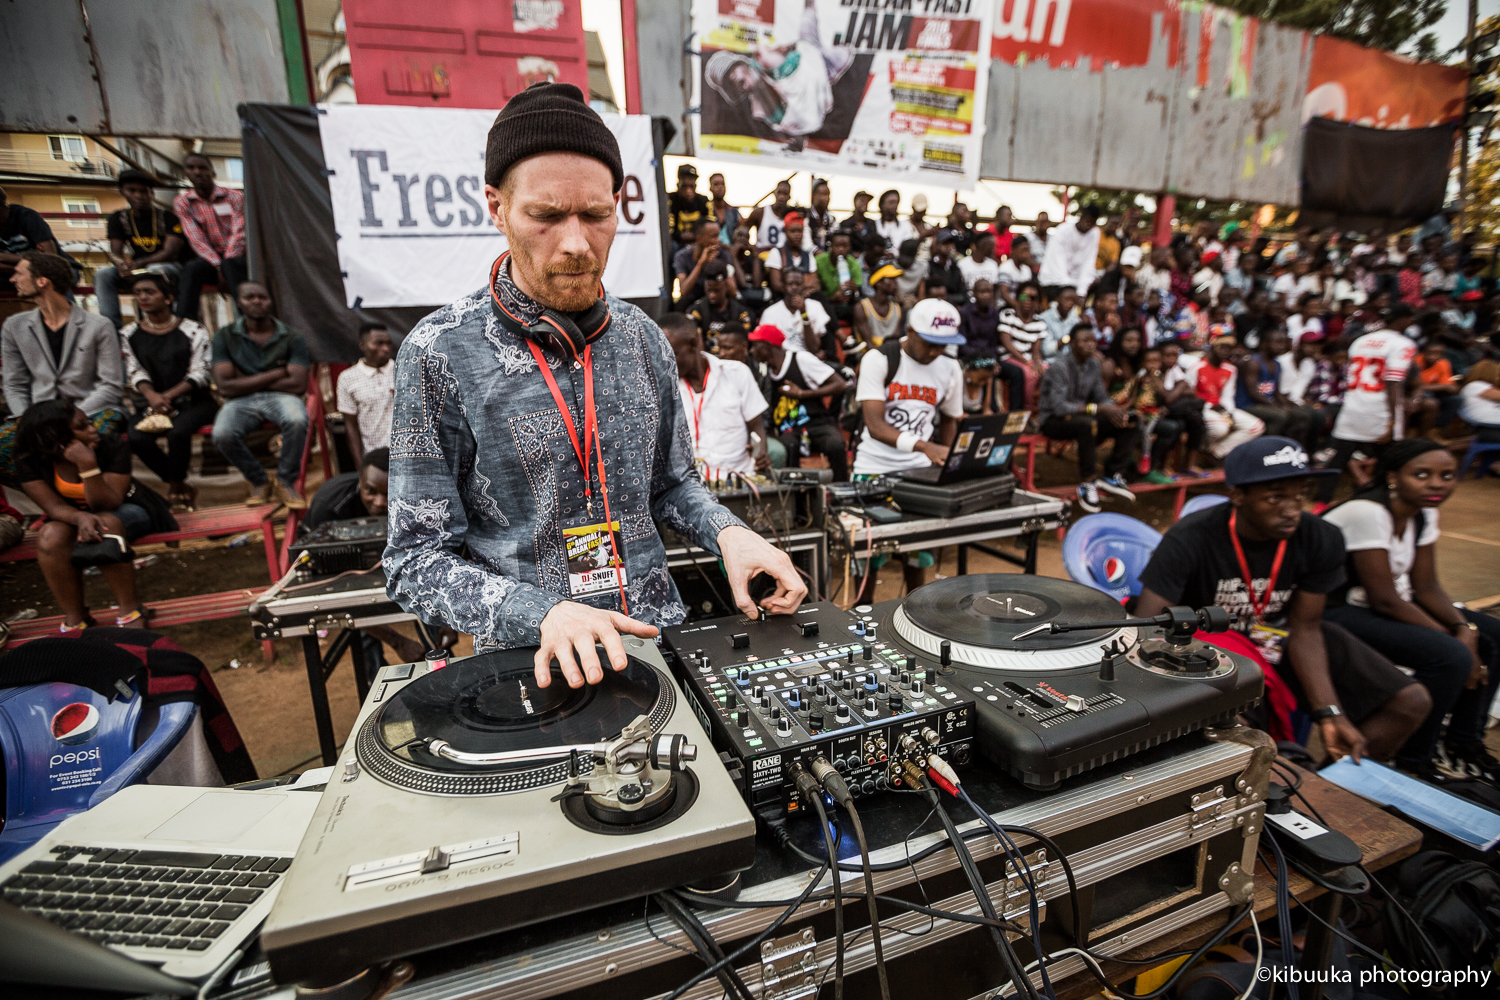 Dj-Snaff-from-uk-doing-what-he-does-best-at-the-event-photo